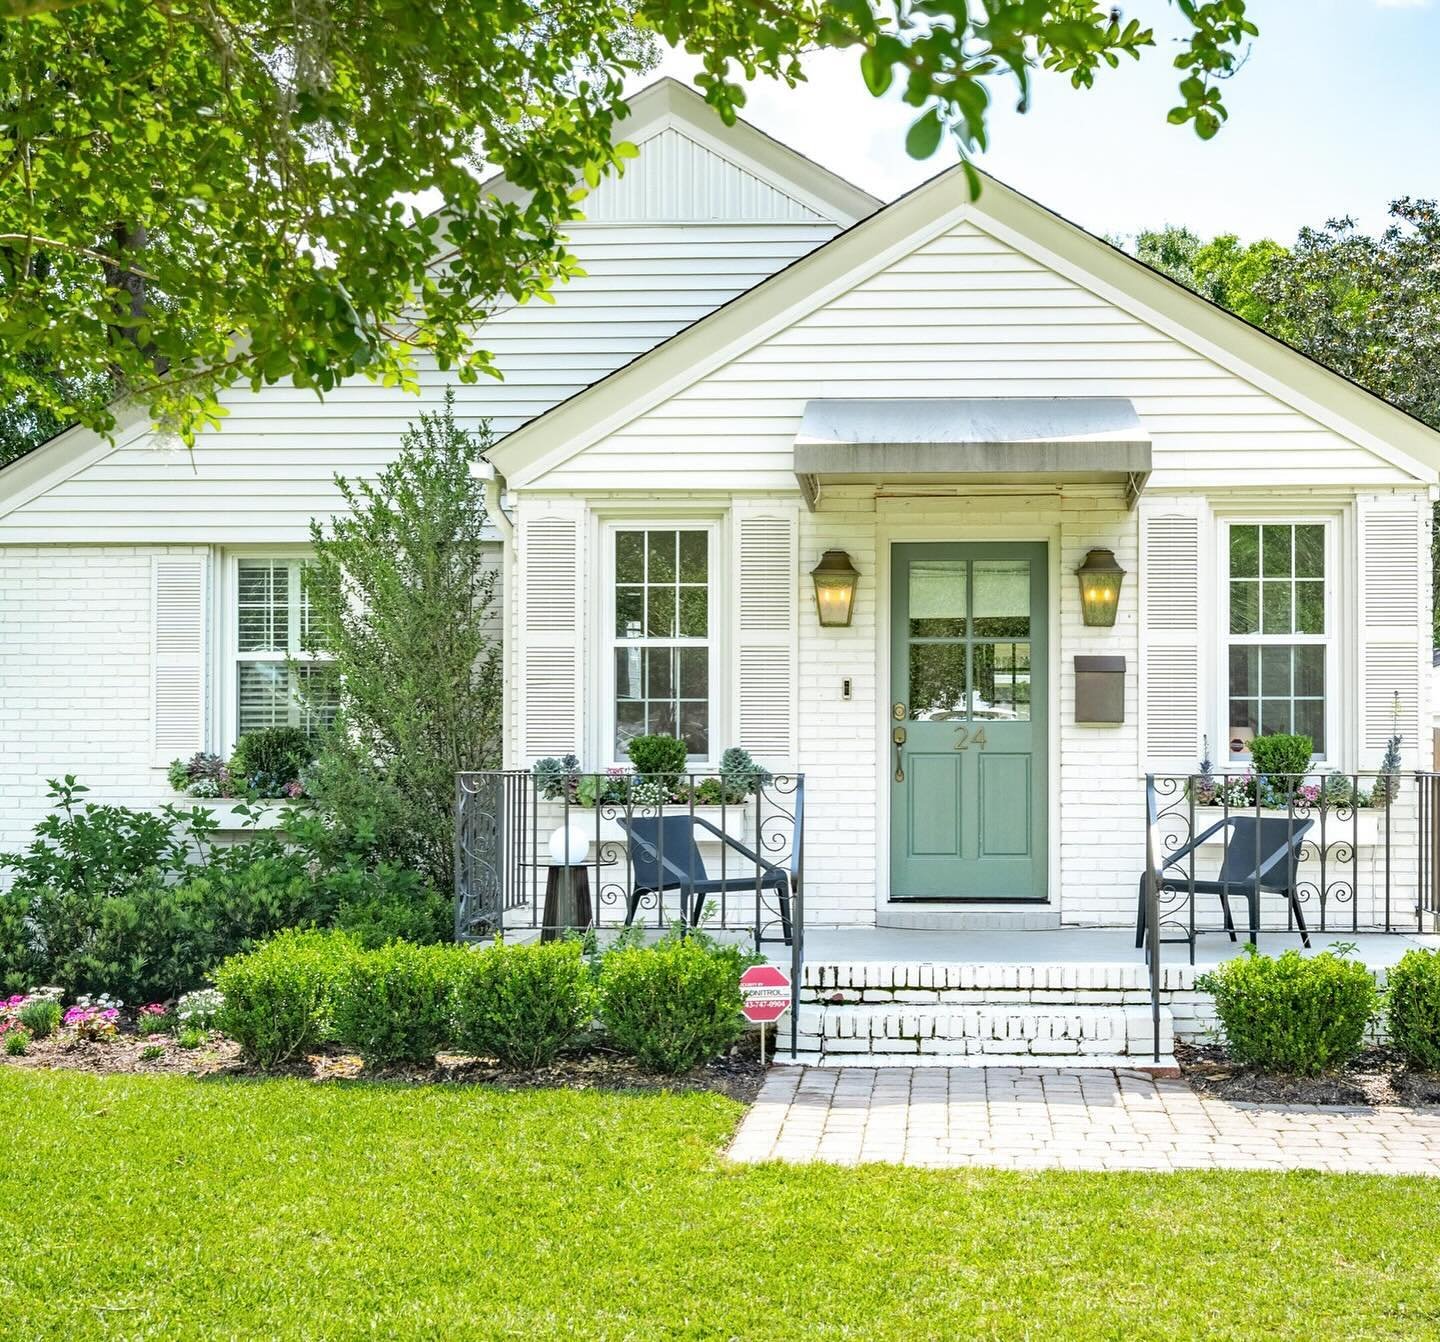 Only slightly obsessed with this adorable cottage in one of my FAVORITE west ashley neighborhoods - would be so perfect as a home, vacation spot, or investment property 🔑 

that backyard too 🤩 

💰 599k

🚗 less than 10 min to downtown charleston
?